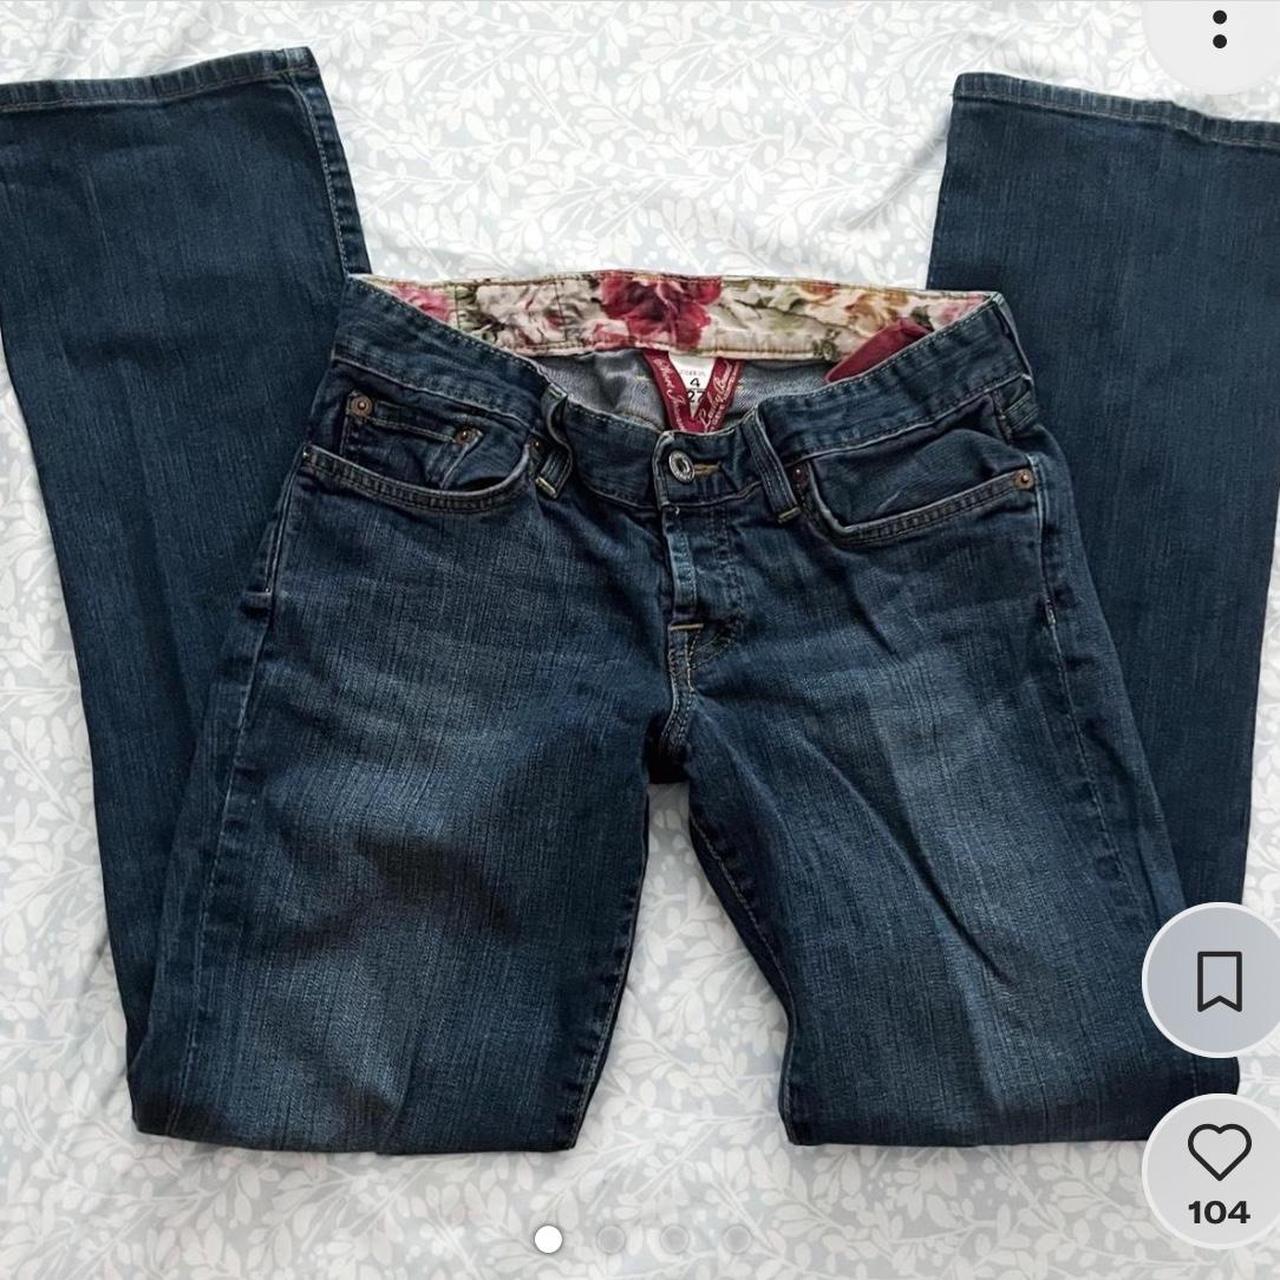 EUC- No stains, holes, or rips Lucky Brand V - Depop